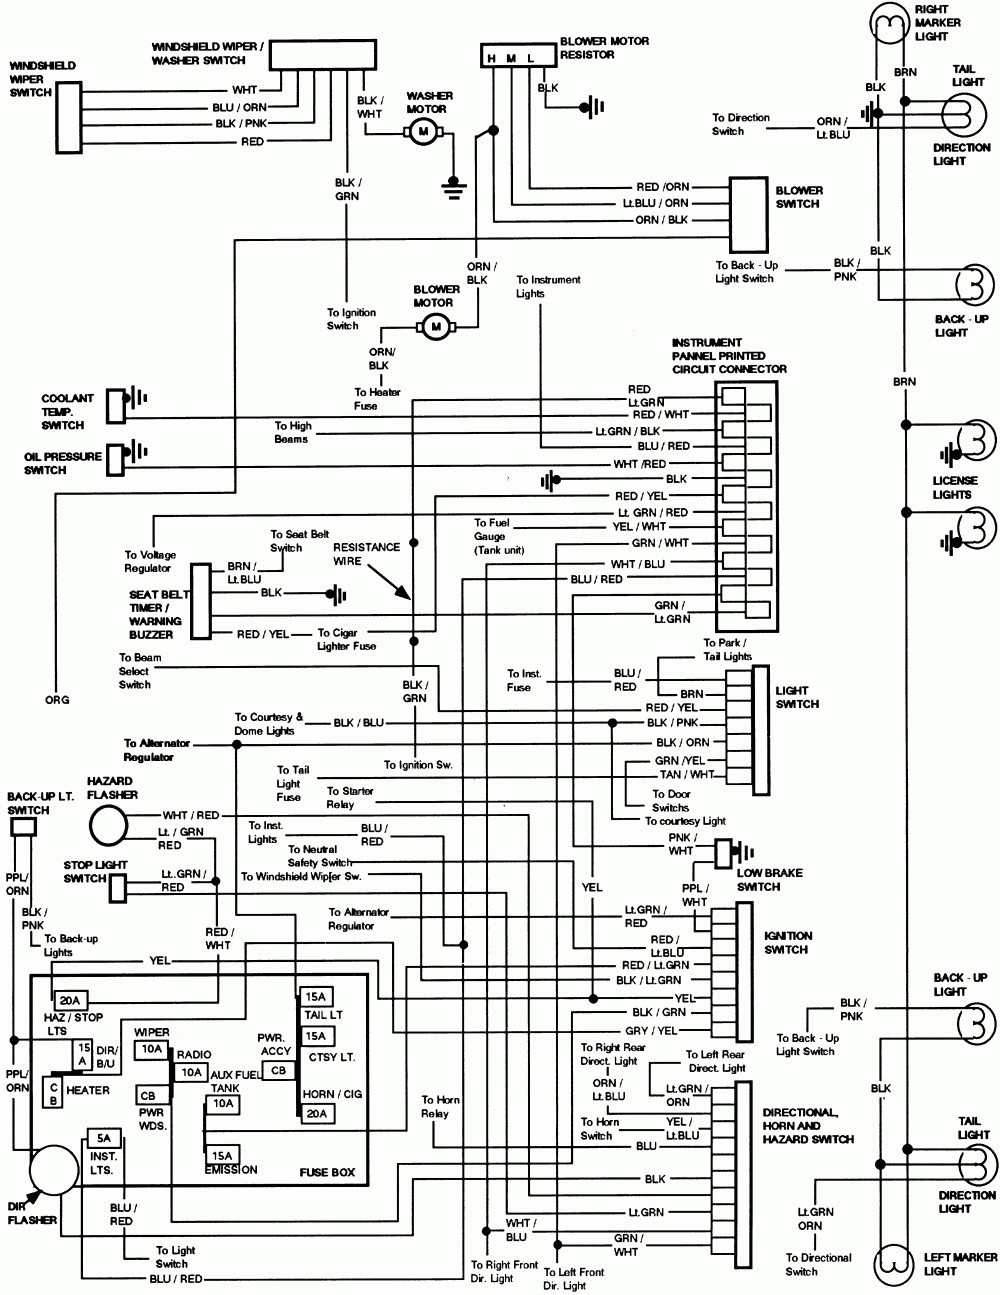 1990 ford f150 starter solenoid wiring diagram awesome 86 ford engine diagram wiring diagrams schematics of 1990 ford f150 starter solenoid wiring diagram